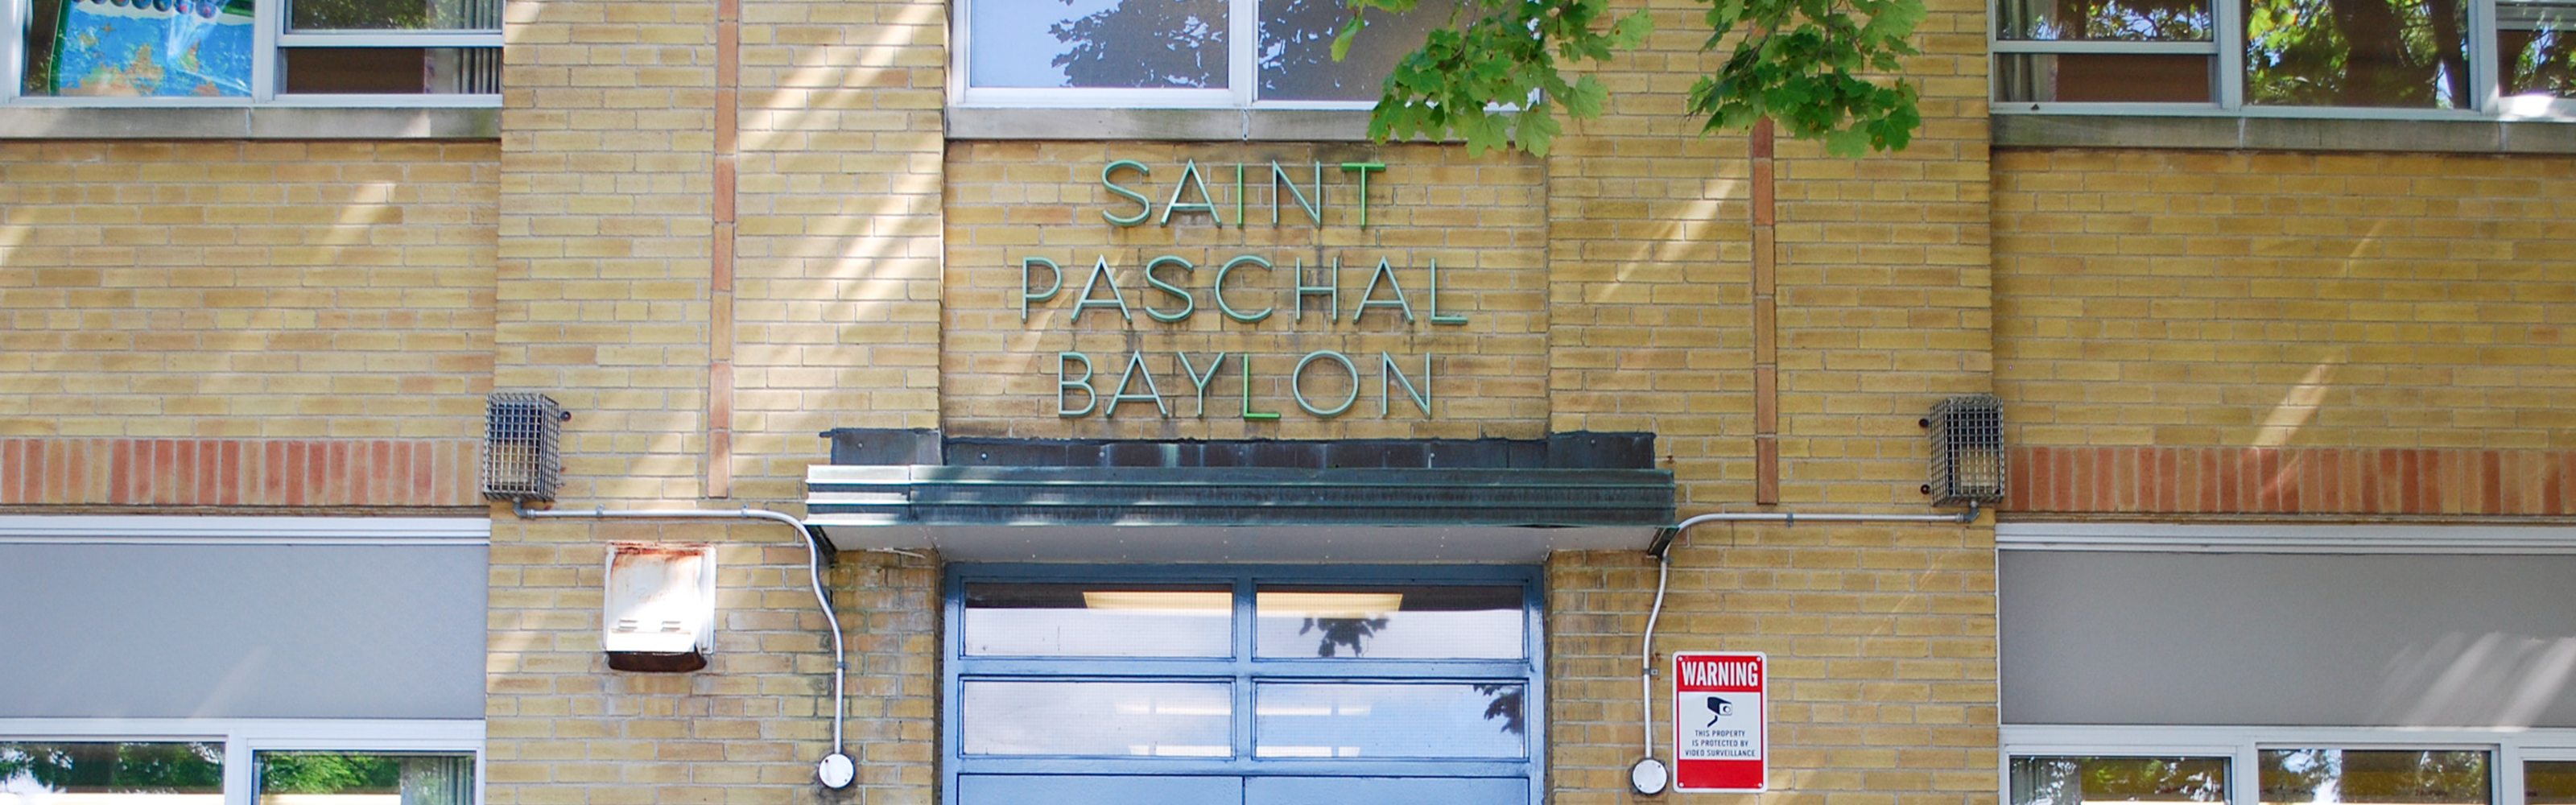 The front of the St. Paschal Baylon Catholic School building.